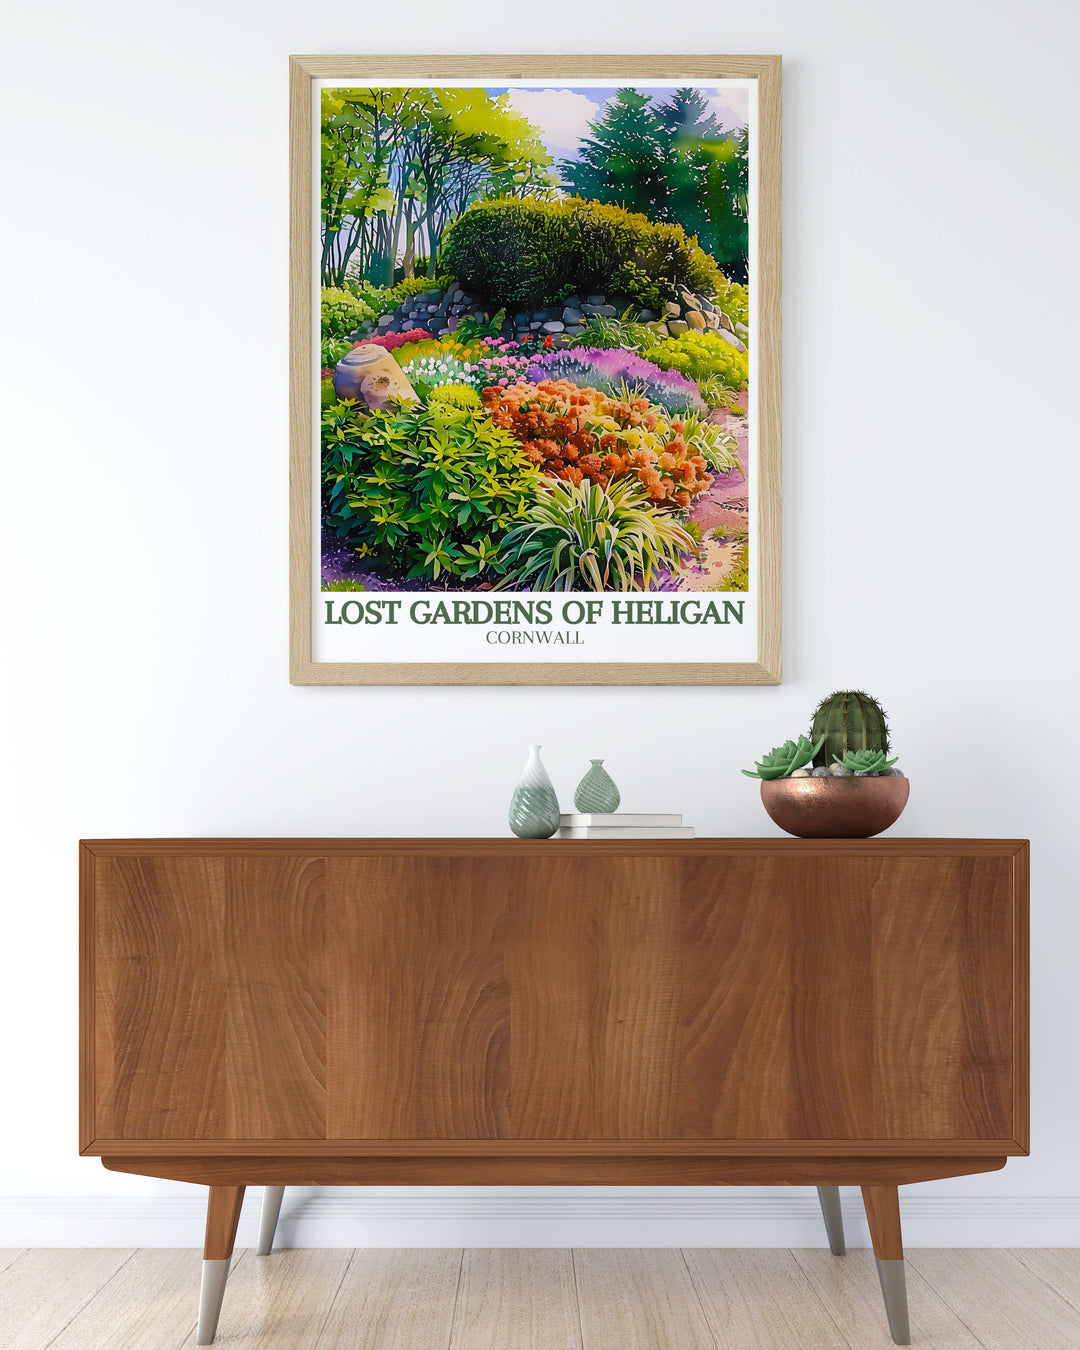 Beautiful Eden Project print and Italian garden Productive gardens art capturing the marvels of Cornwalls renowned ecological paradise ideal for nature lovers and garden enthusiasts looking to enhance their space with botanical elegance